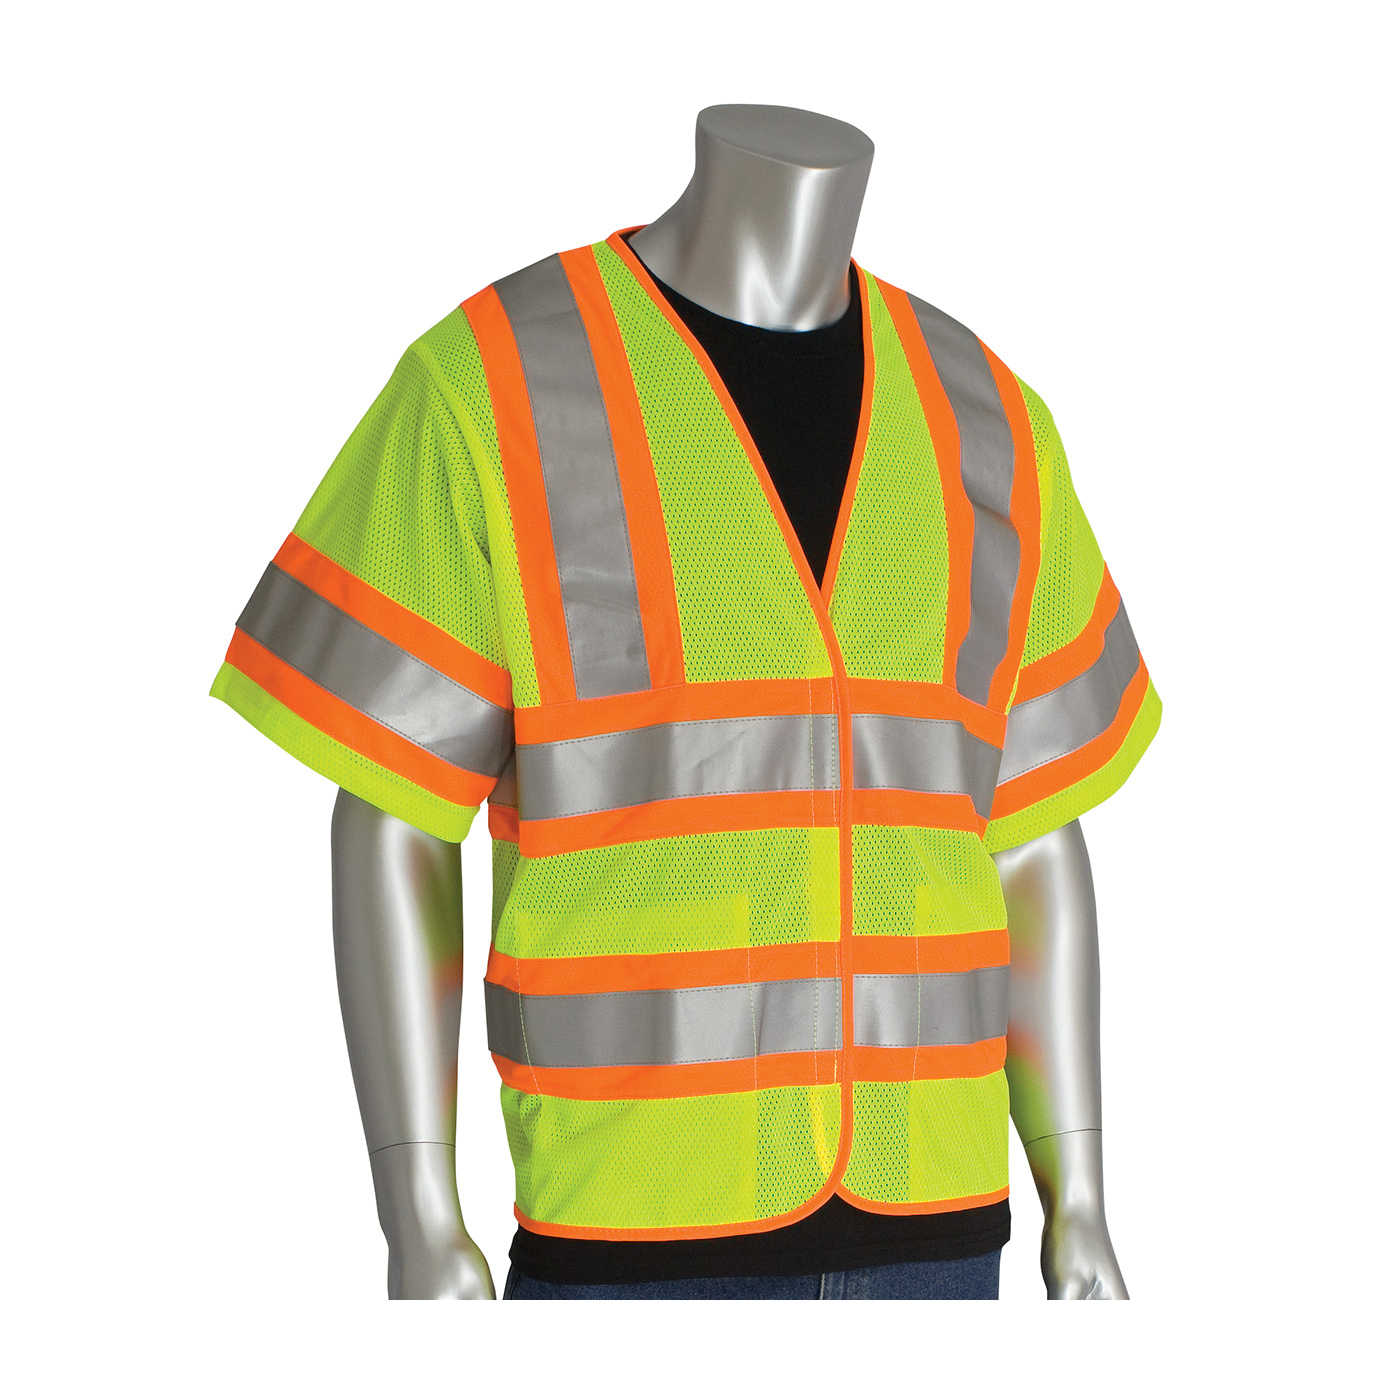 PIP® SafetyGear 305-HSVPFRLY-2X/3X 2-Tone FR Treated Safety Vest, 2XL/3XL, Hi-Viz Yellow, Polyester, Hook and Loop Closure, 2 Pockets, ANSI Class: Class 3, Specifications Met: ANSI Specified